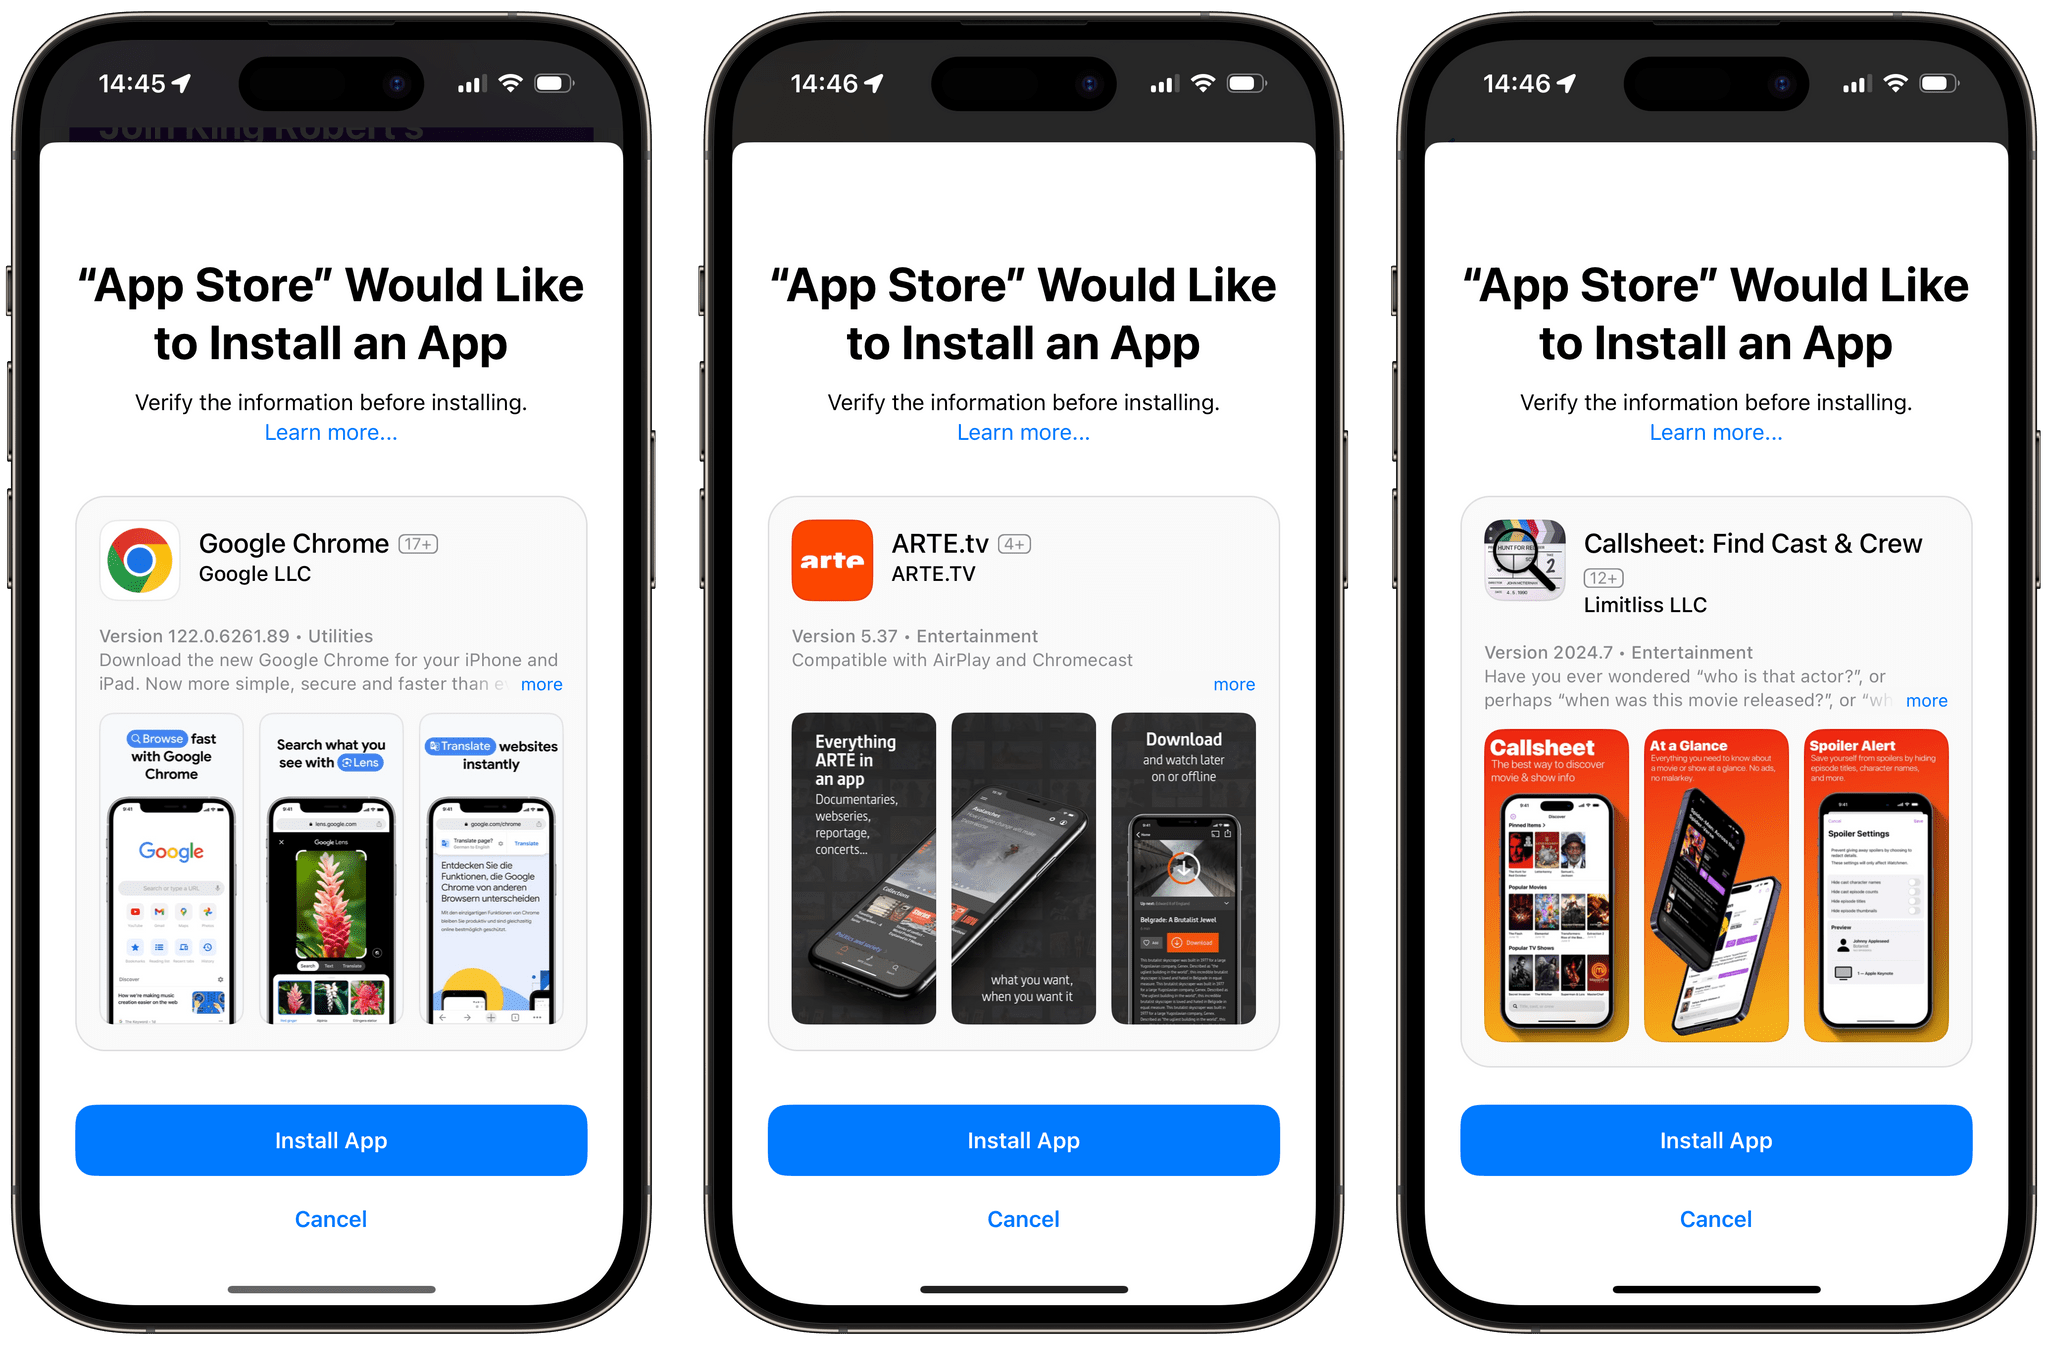 This confirmation screen should appear when installing an app from alternative marketplaces in the EU, starting in iOS 17.4.